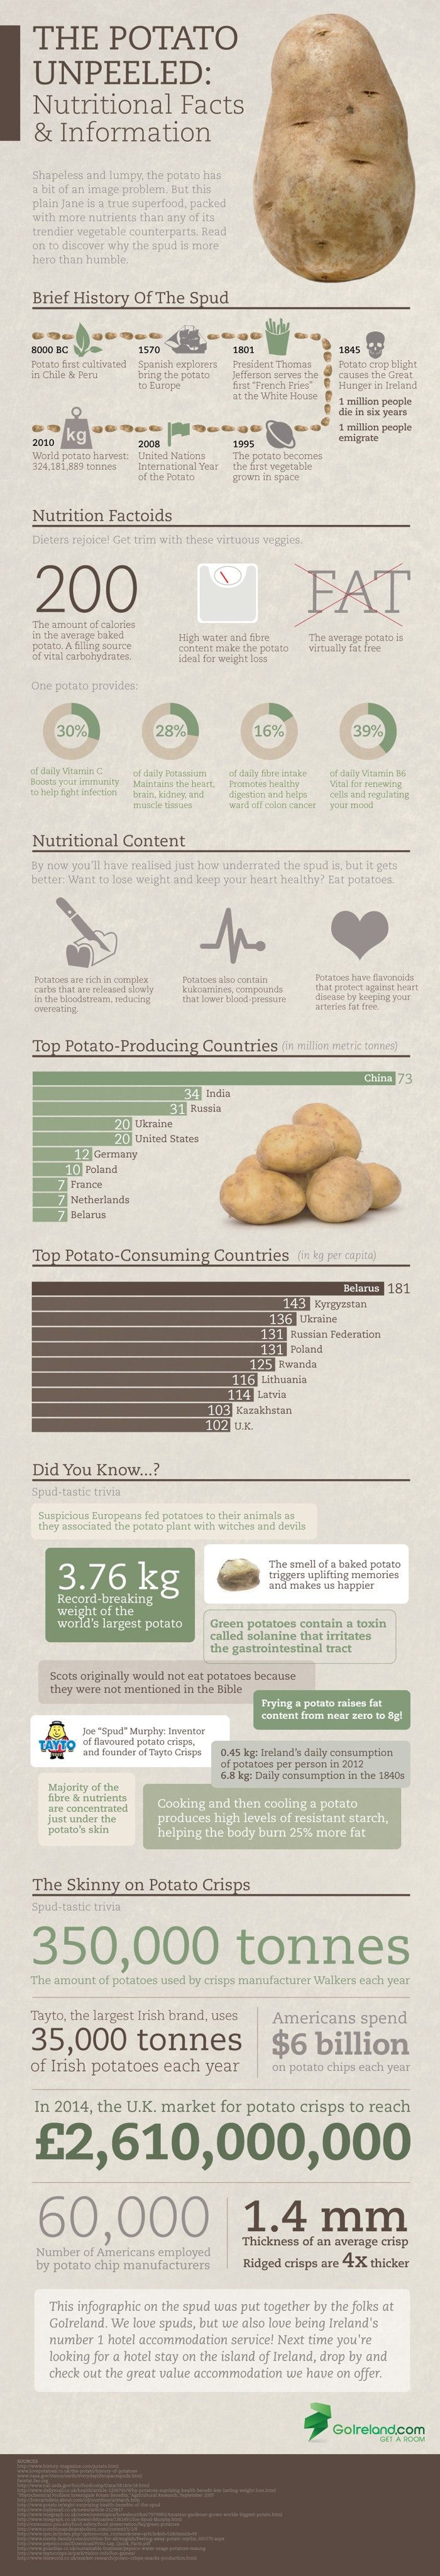 Potato Nutritional Value
 The Potato Unpeeled Nutritional Facts & Information